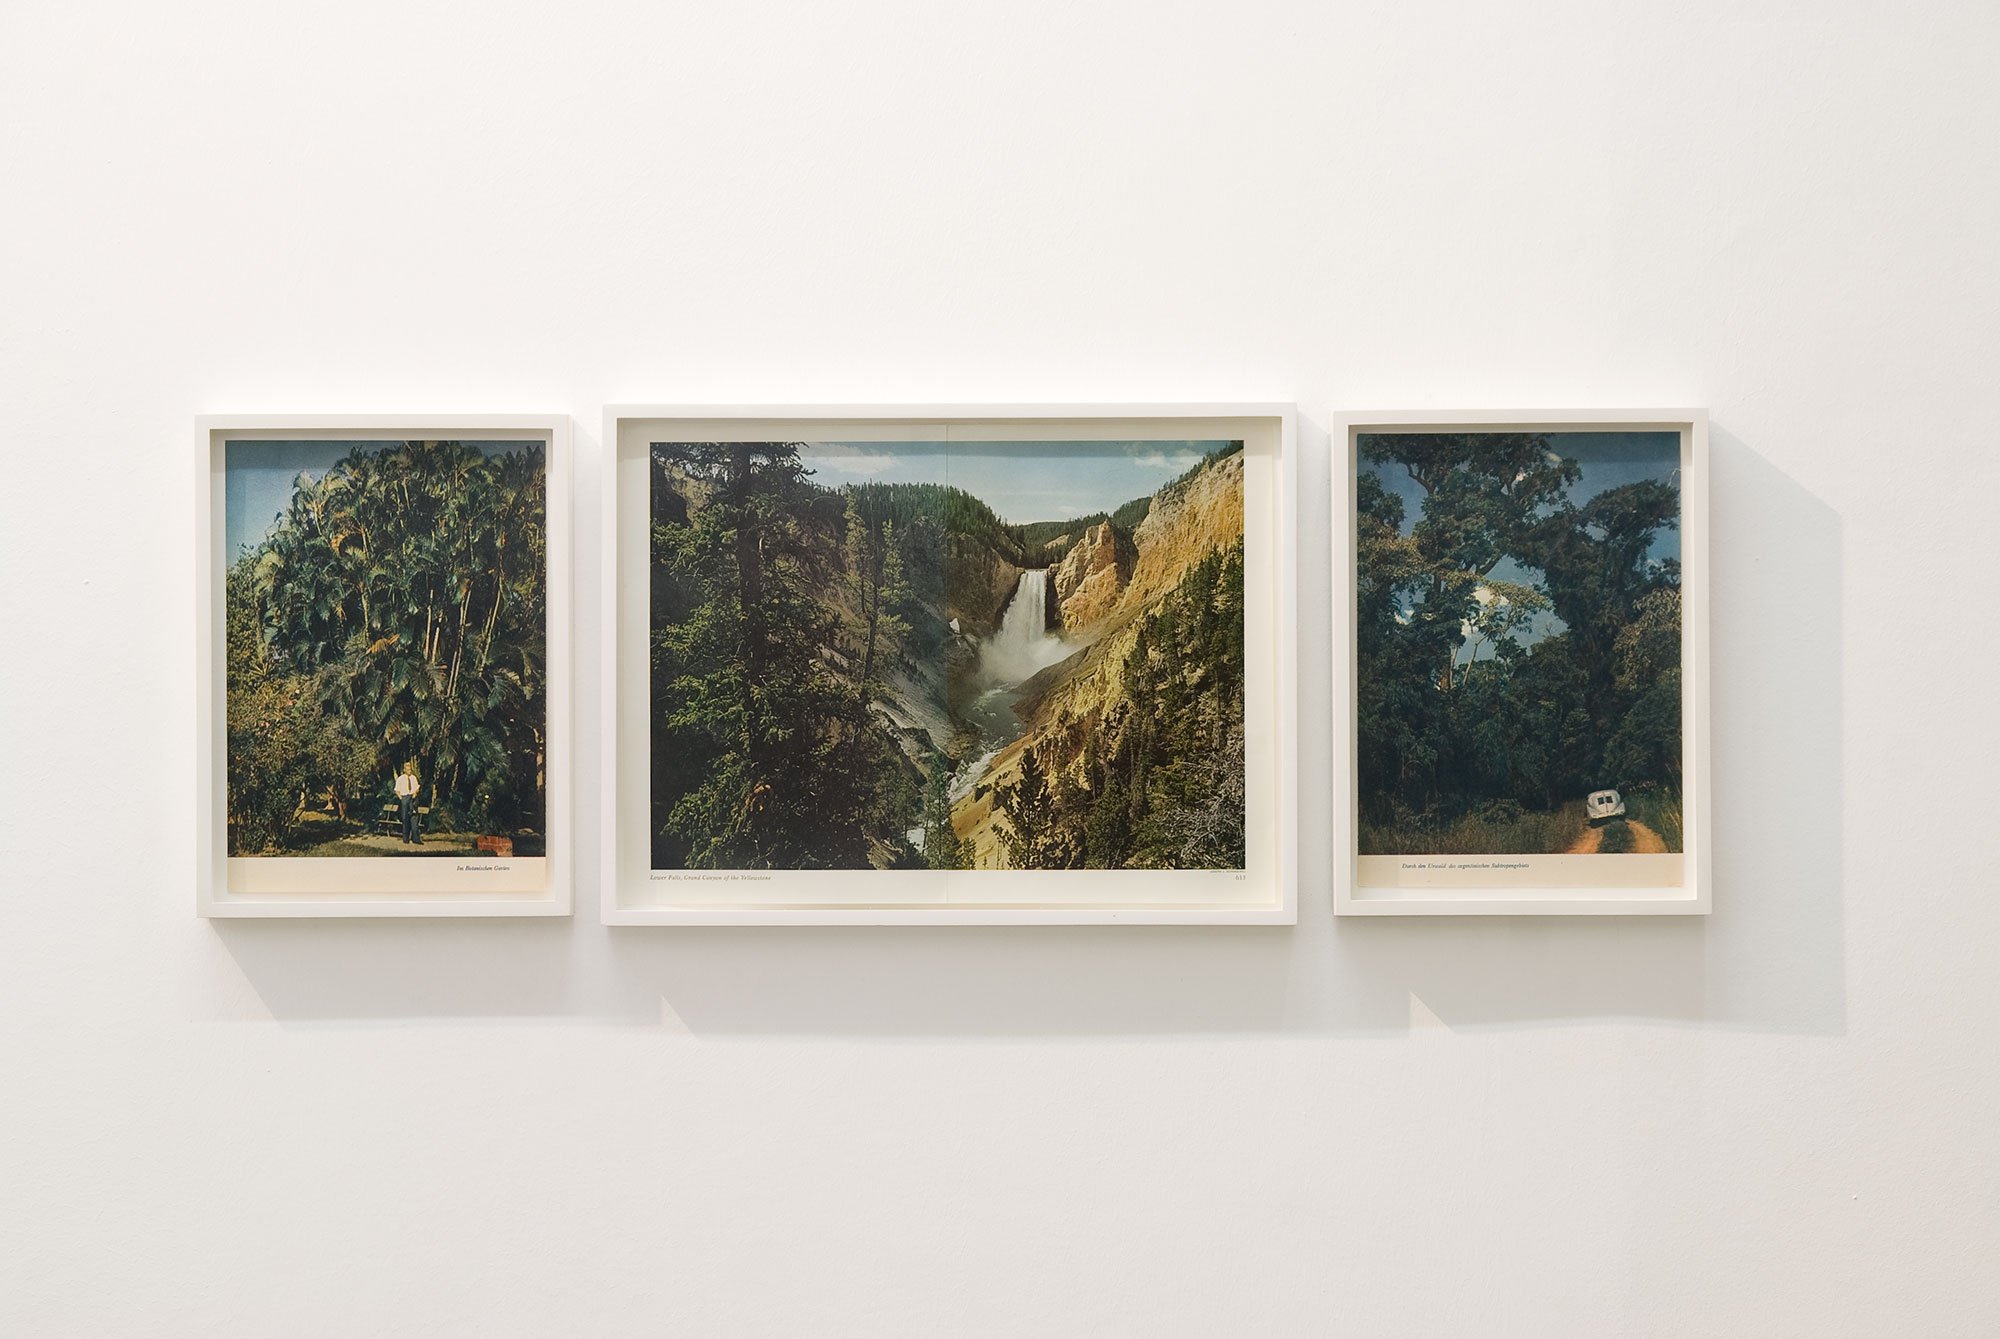 Haris Epaminonda, Untitled, triptych with found images of waterfalls, 26.2 x 19.4 cm; 36.3 x 27.2 cm; 26.2 x 19.4 cm. Installation view, VOL. IV, Rodeo, Istanbul, 2009